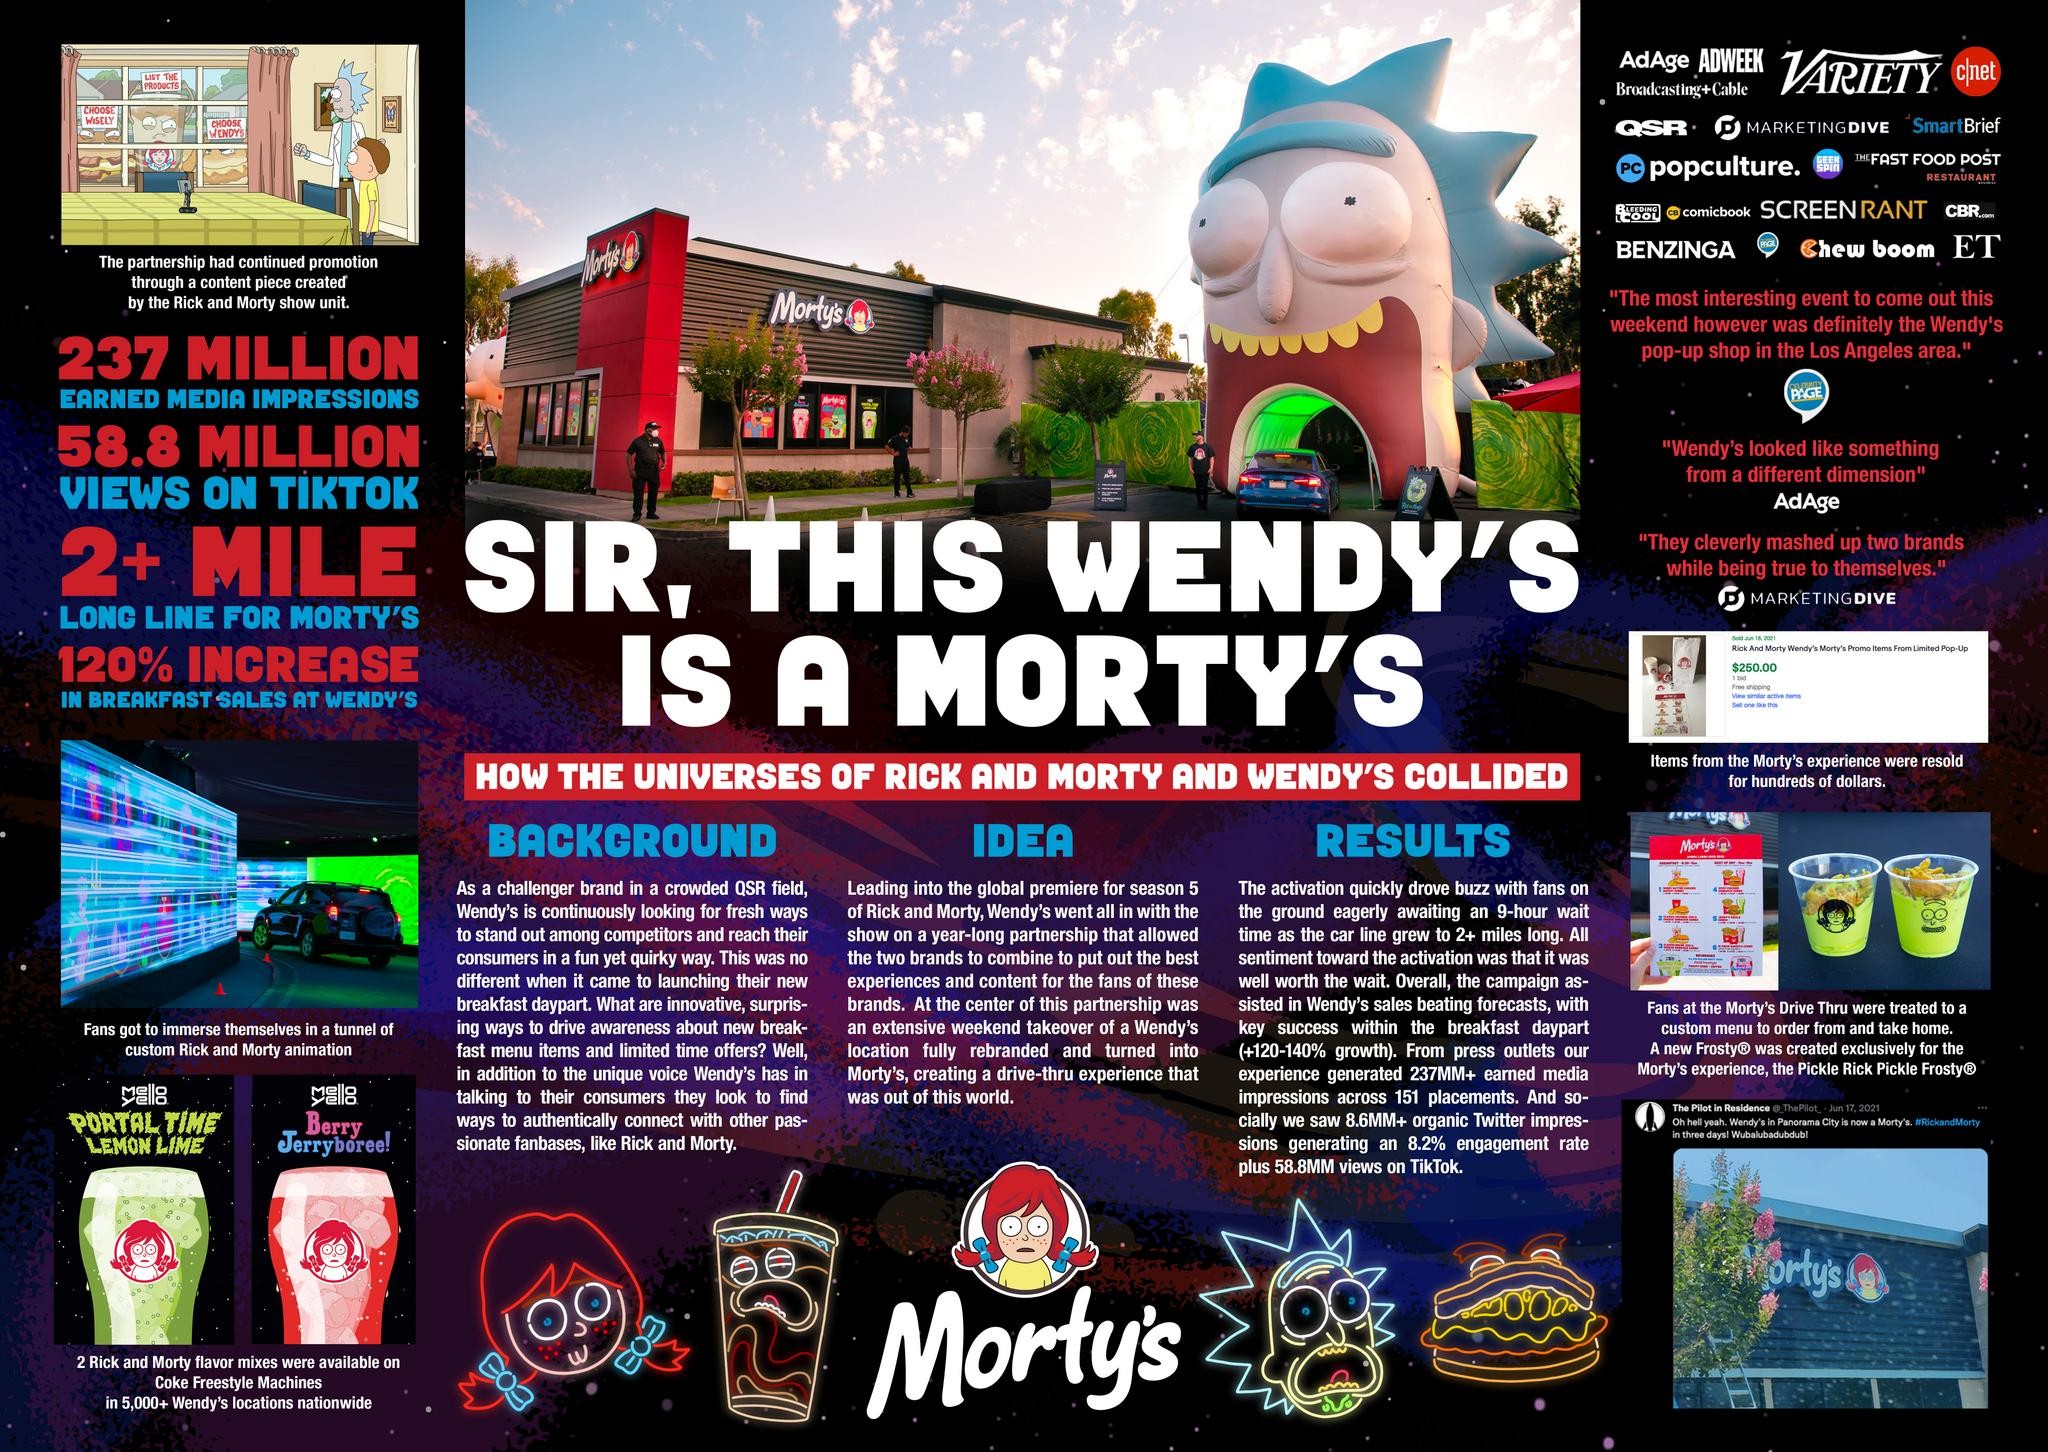 "Sir, This Wendy's is a Morty's!"